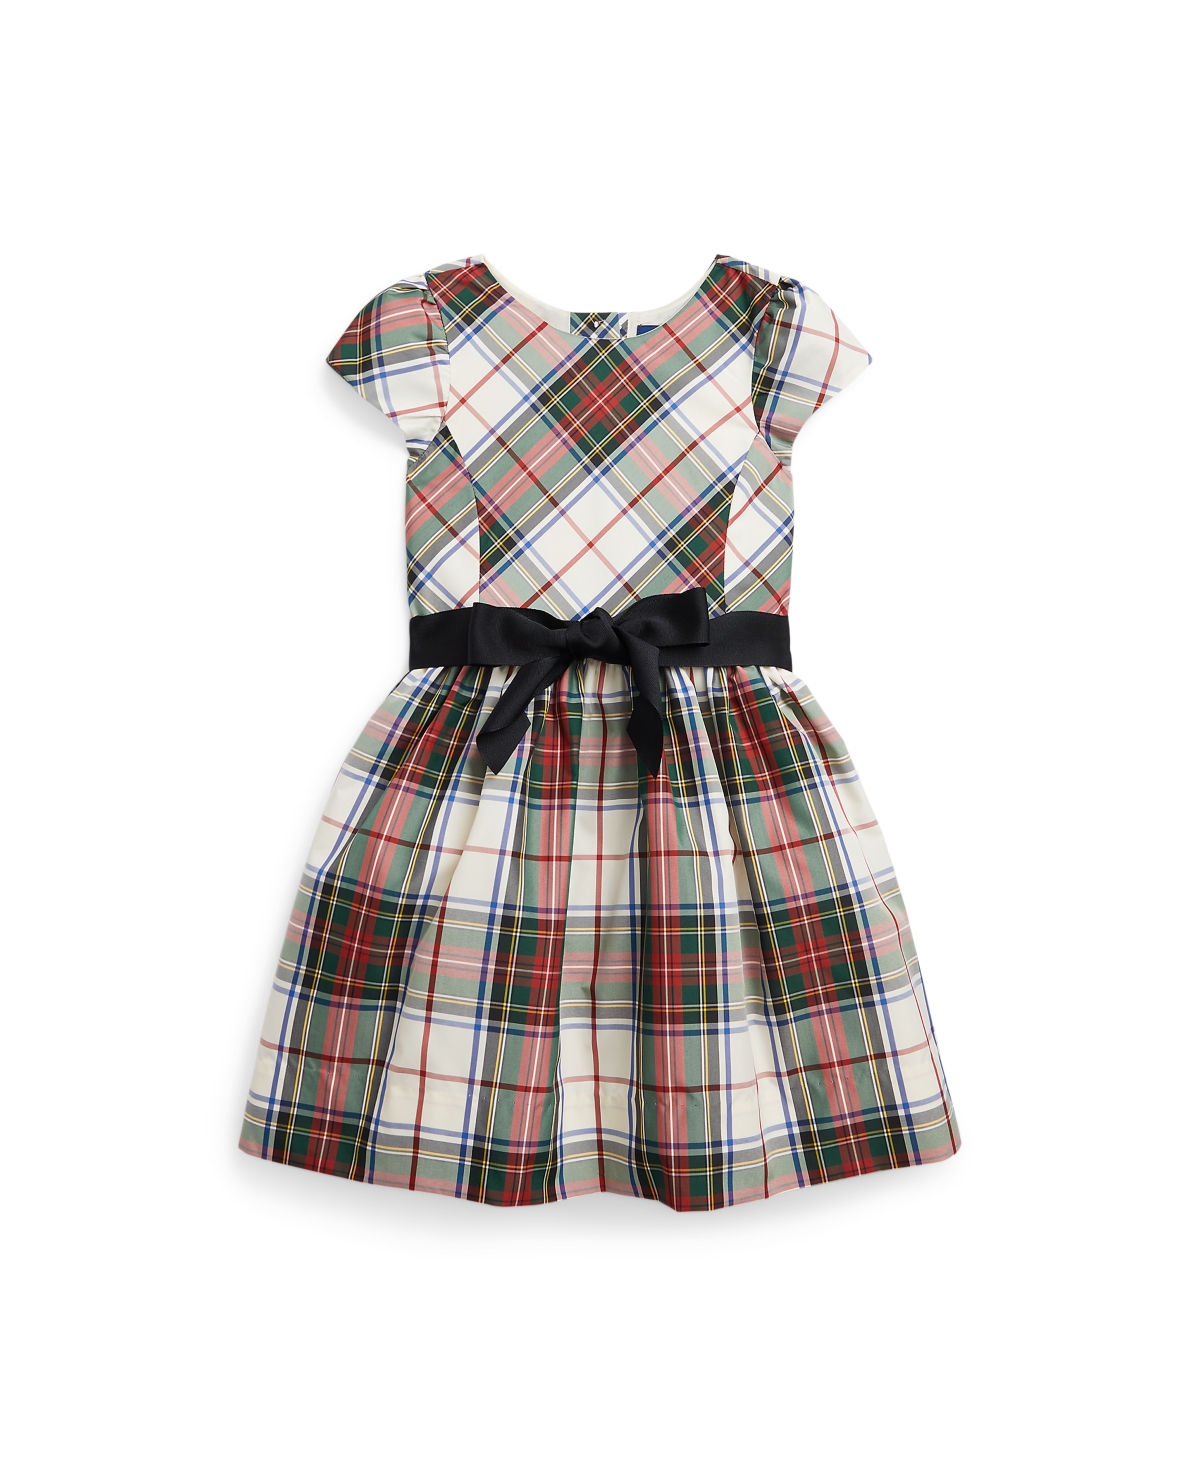 POLO RALPH LAUREN TODDLER AND LITTLE GIRLS PLAID FIT-AND-FLARE DRESS